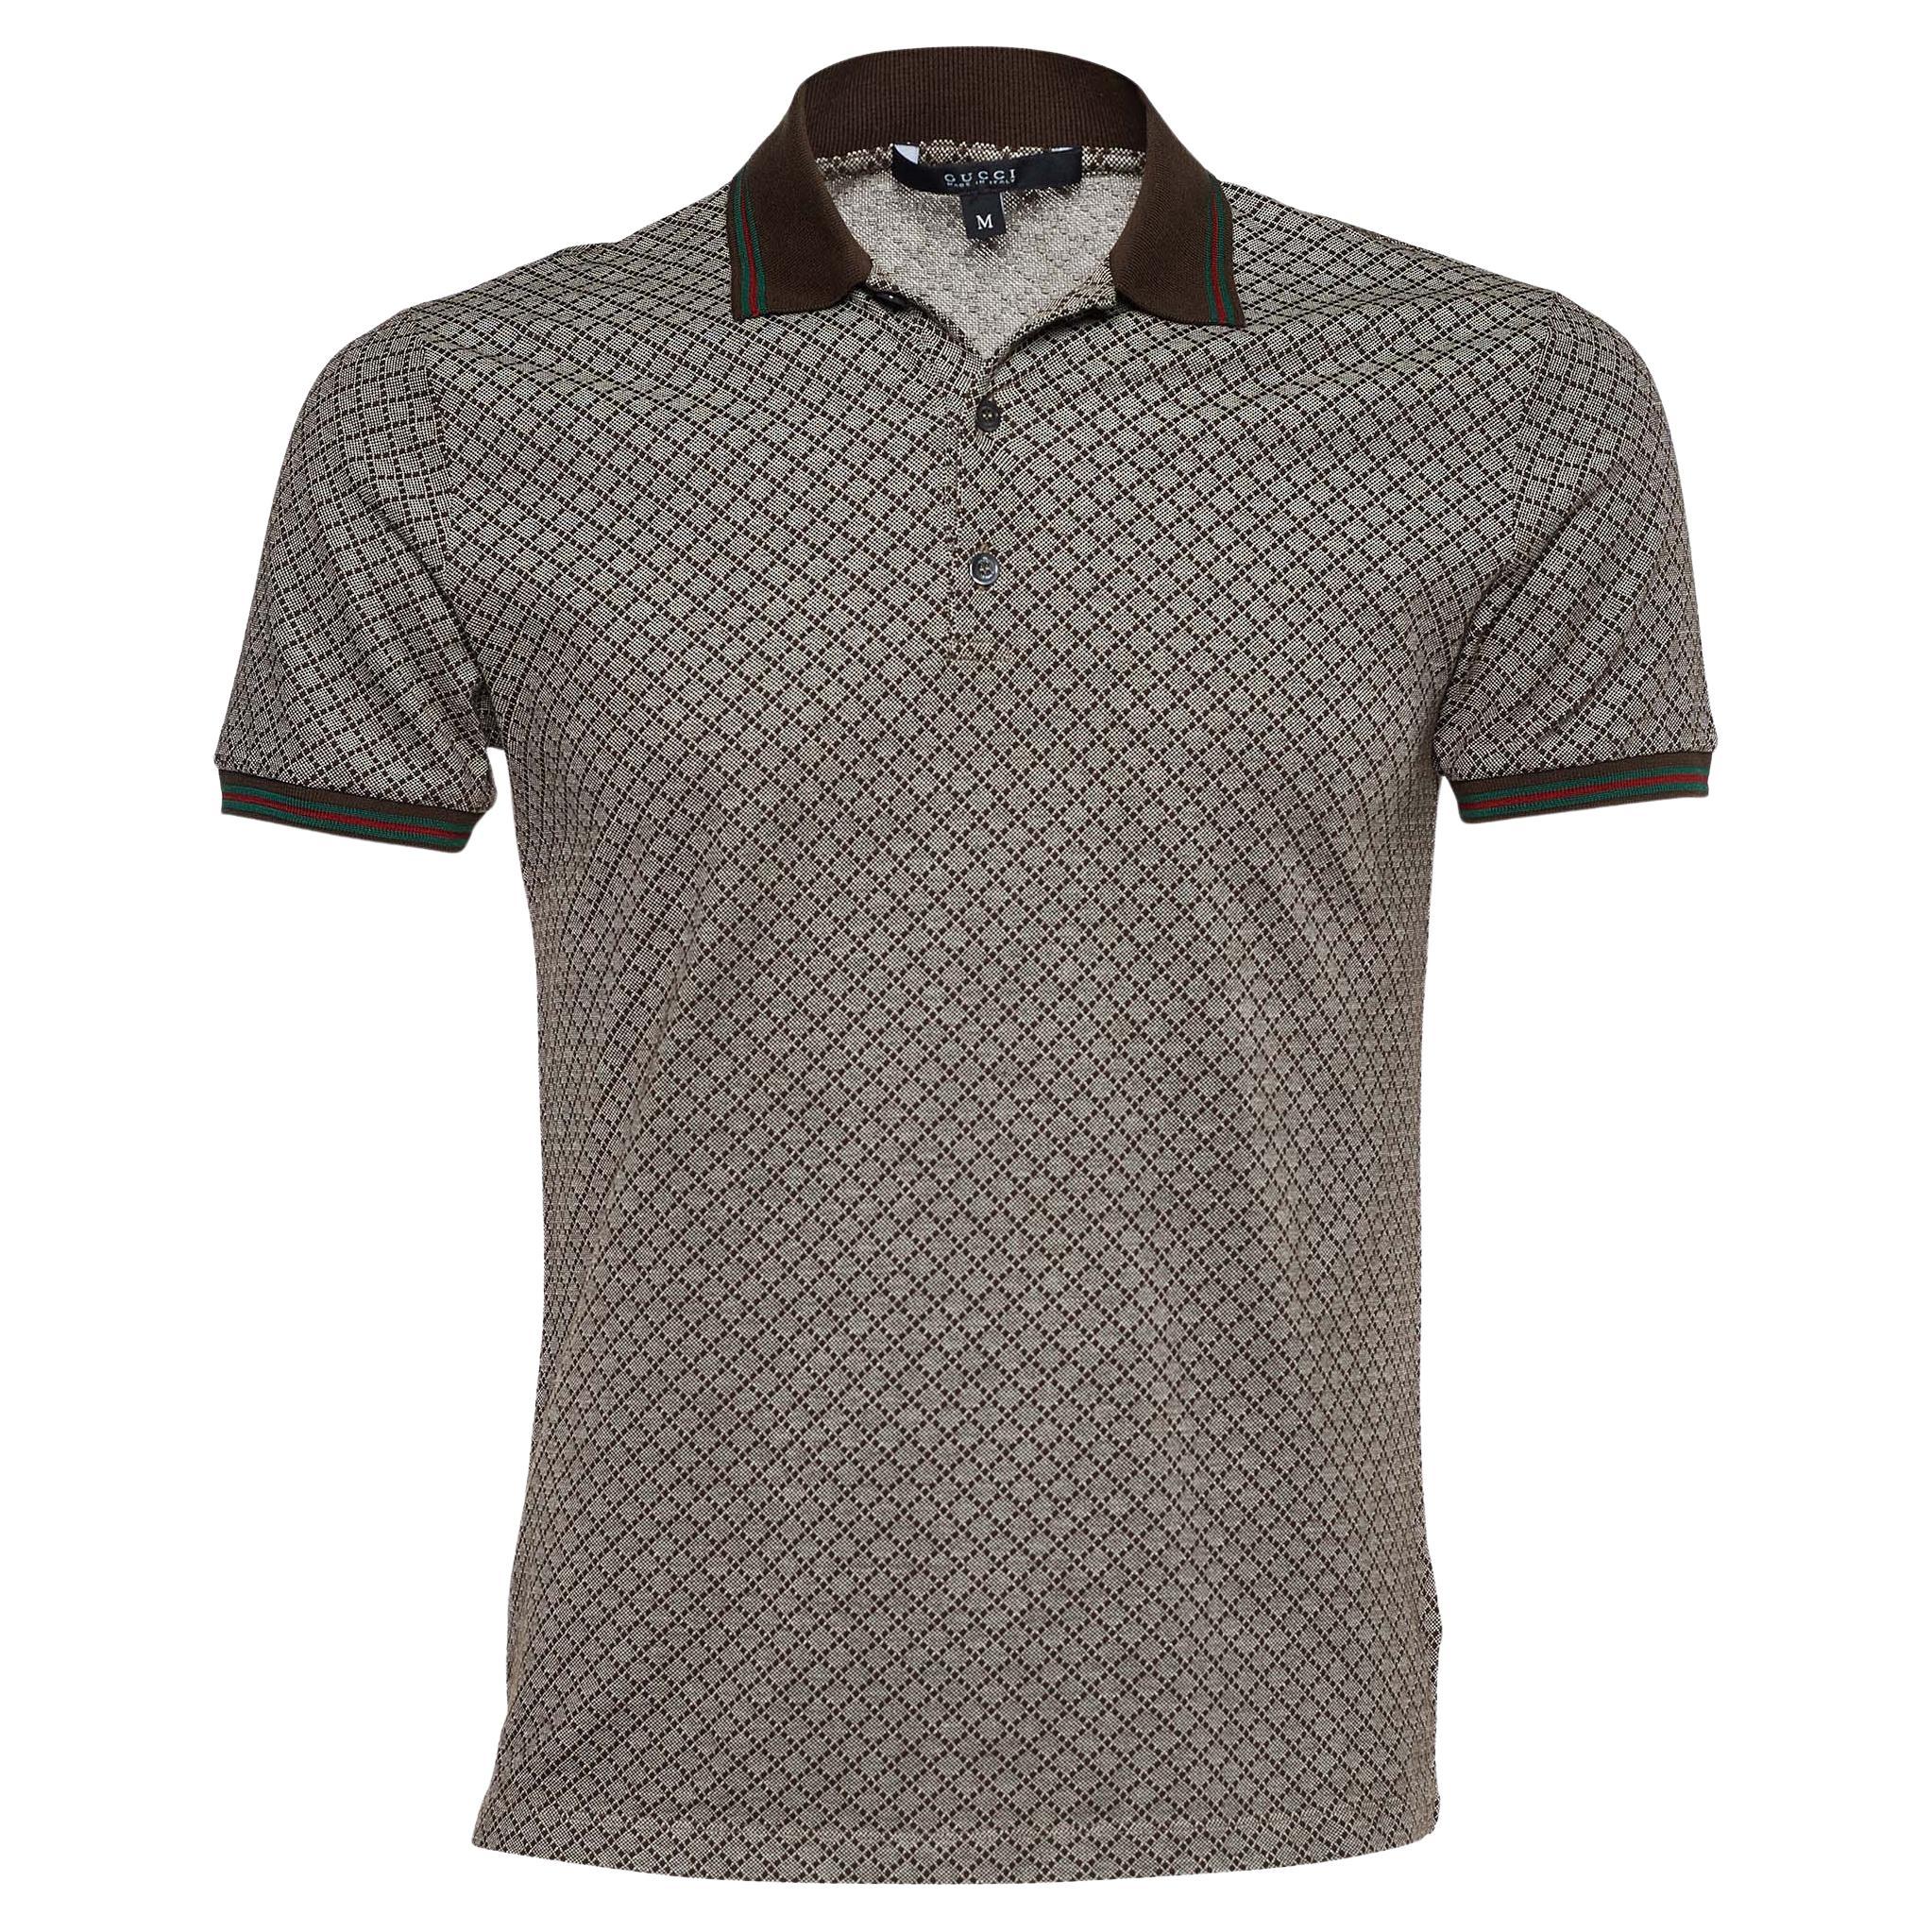 Gucci Polo shirt with logo, Men's Clothing